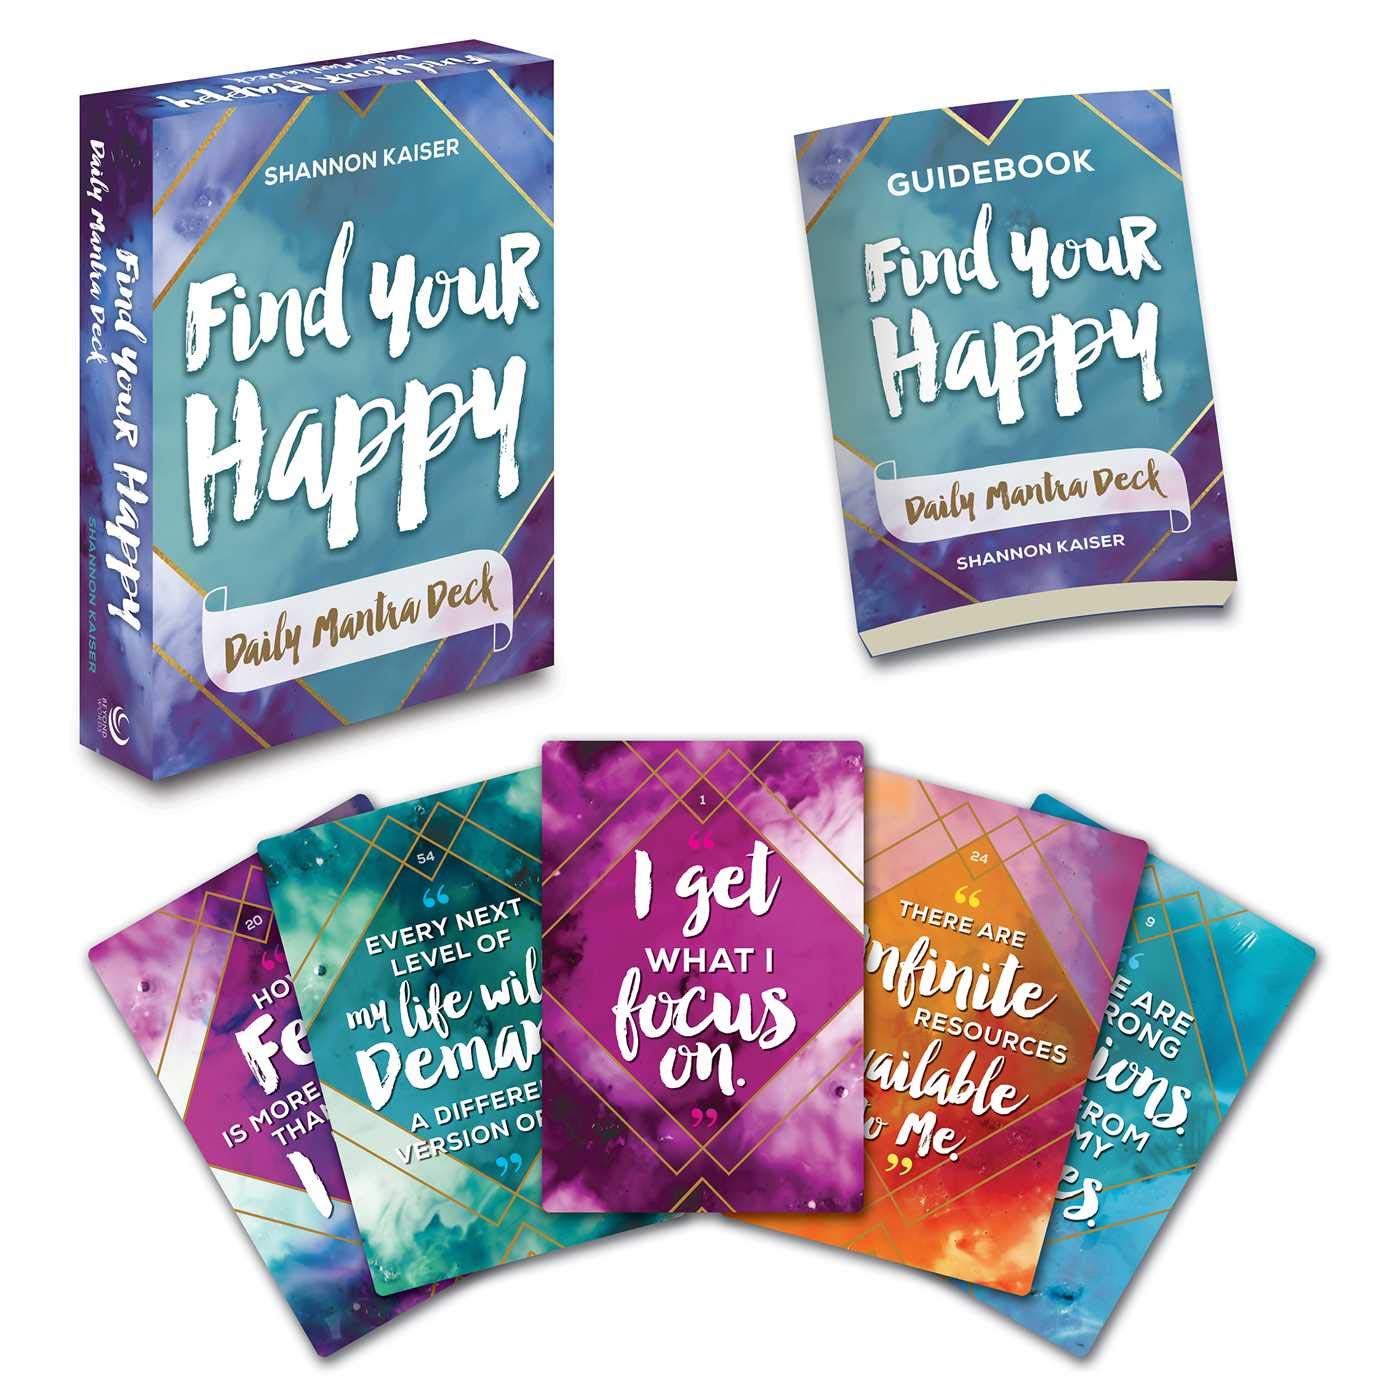 Find Your Happy Daily Mantra Deck